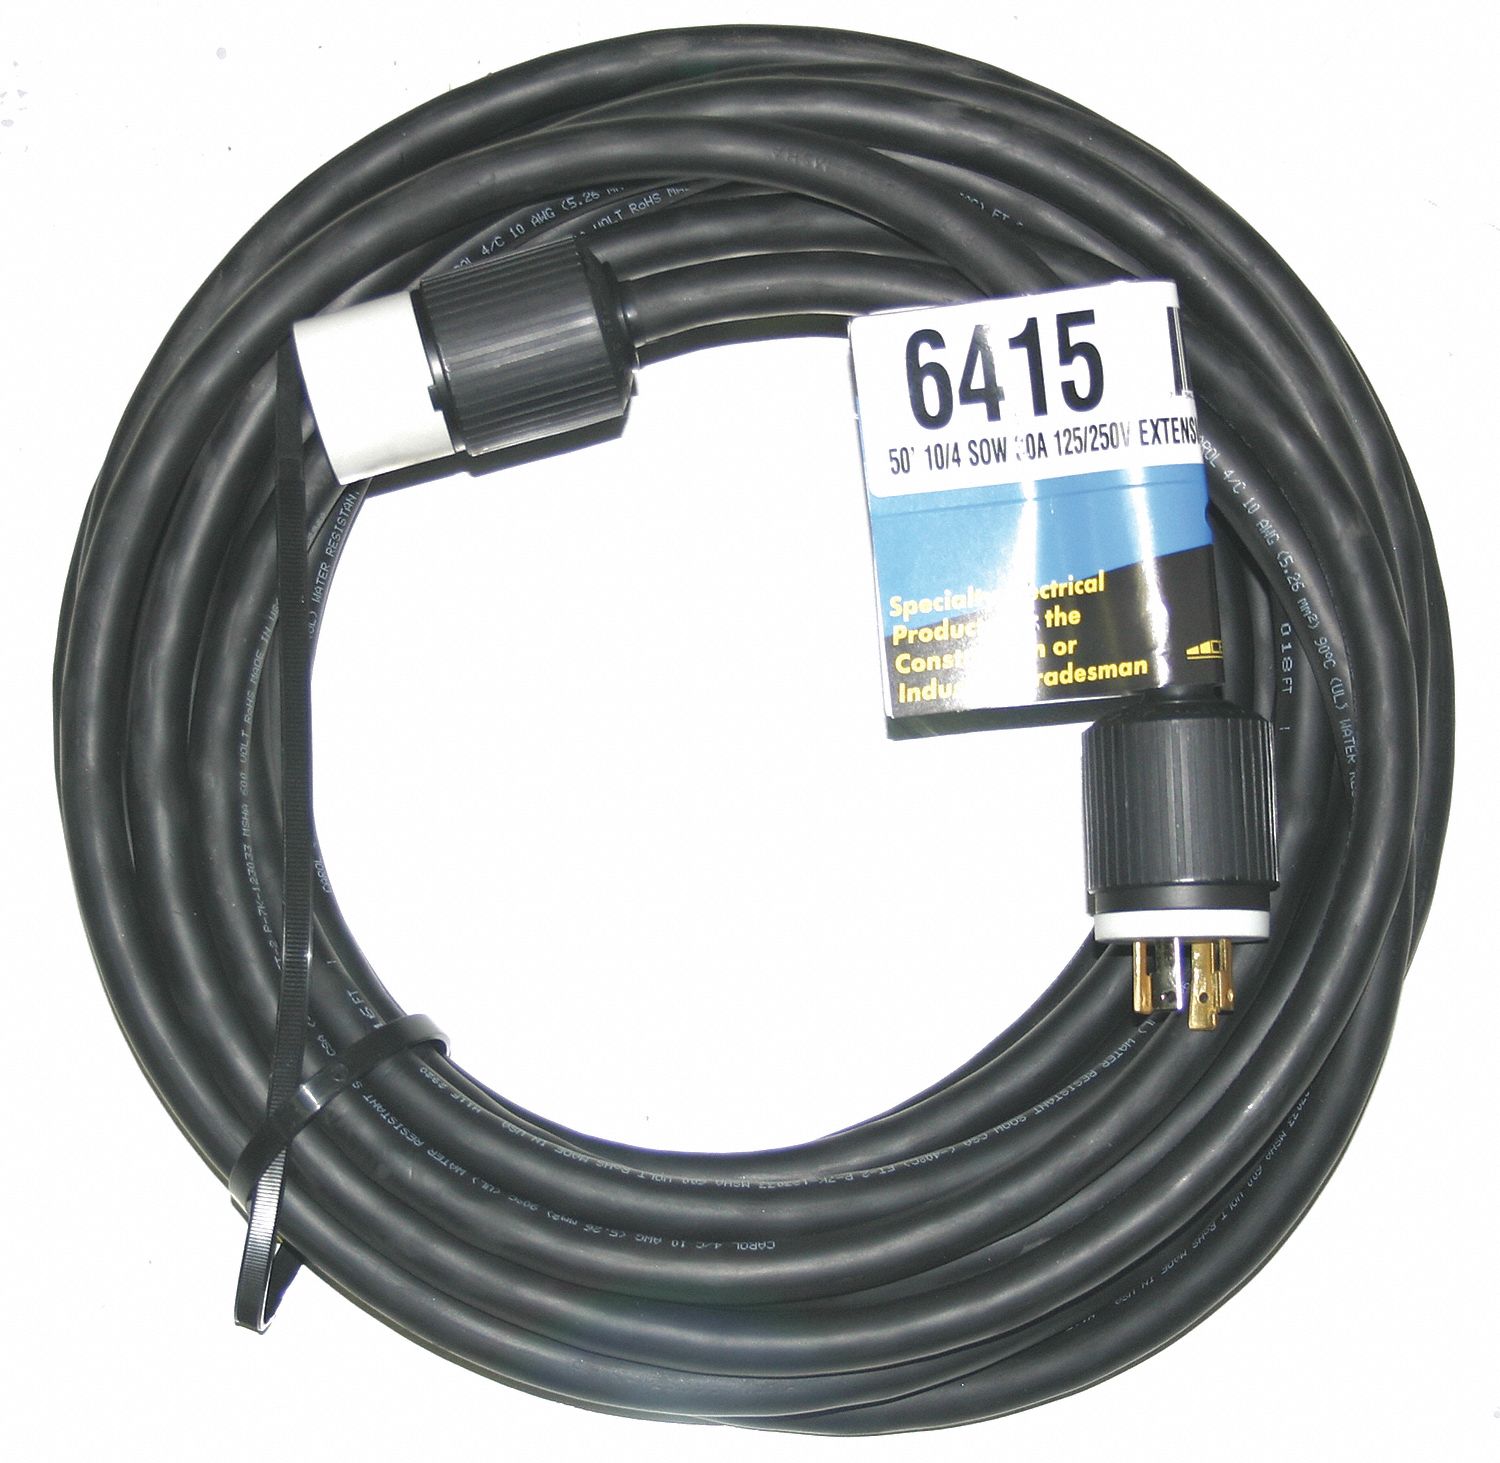 Indoor/Outdoor Extension Cord, 50 ft. Cord Length, 10/4 Gauge/Conductor, 30 Max. Amps